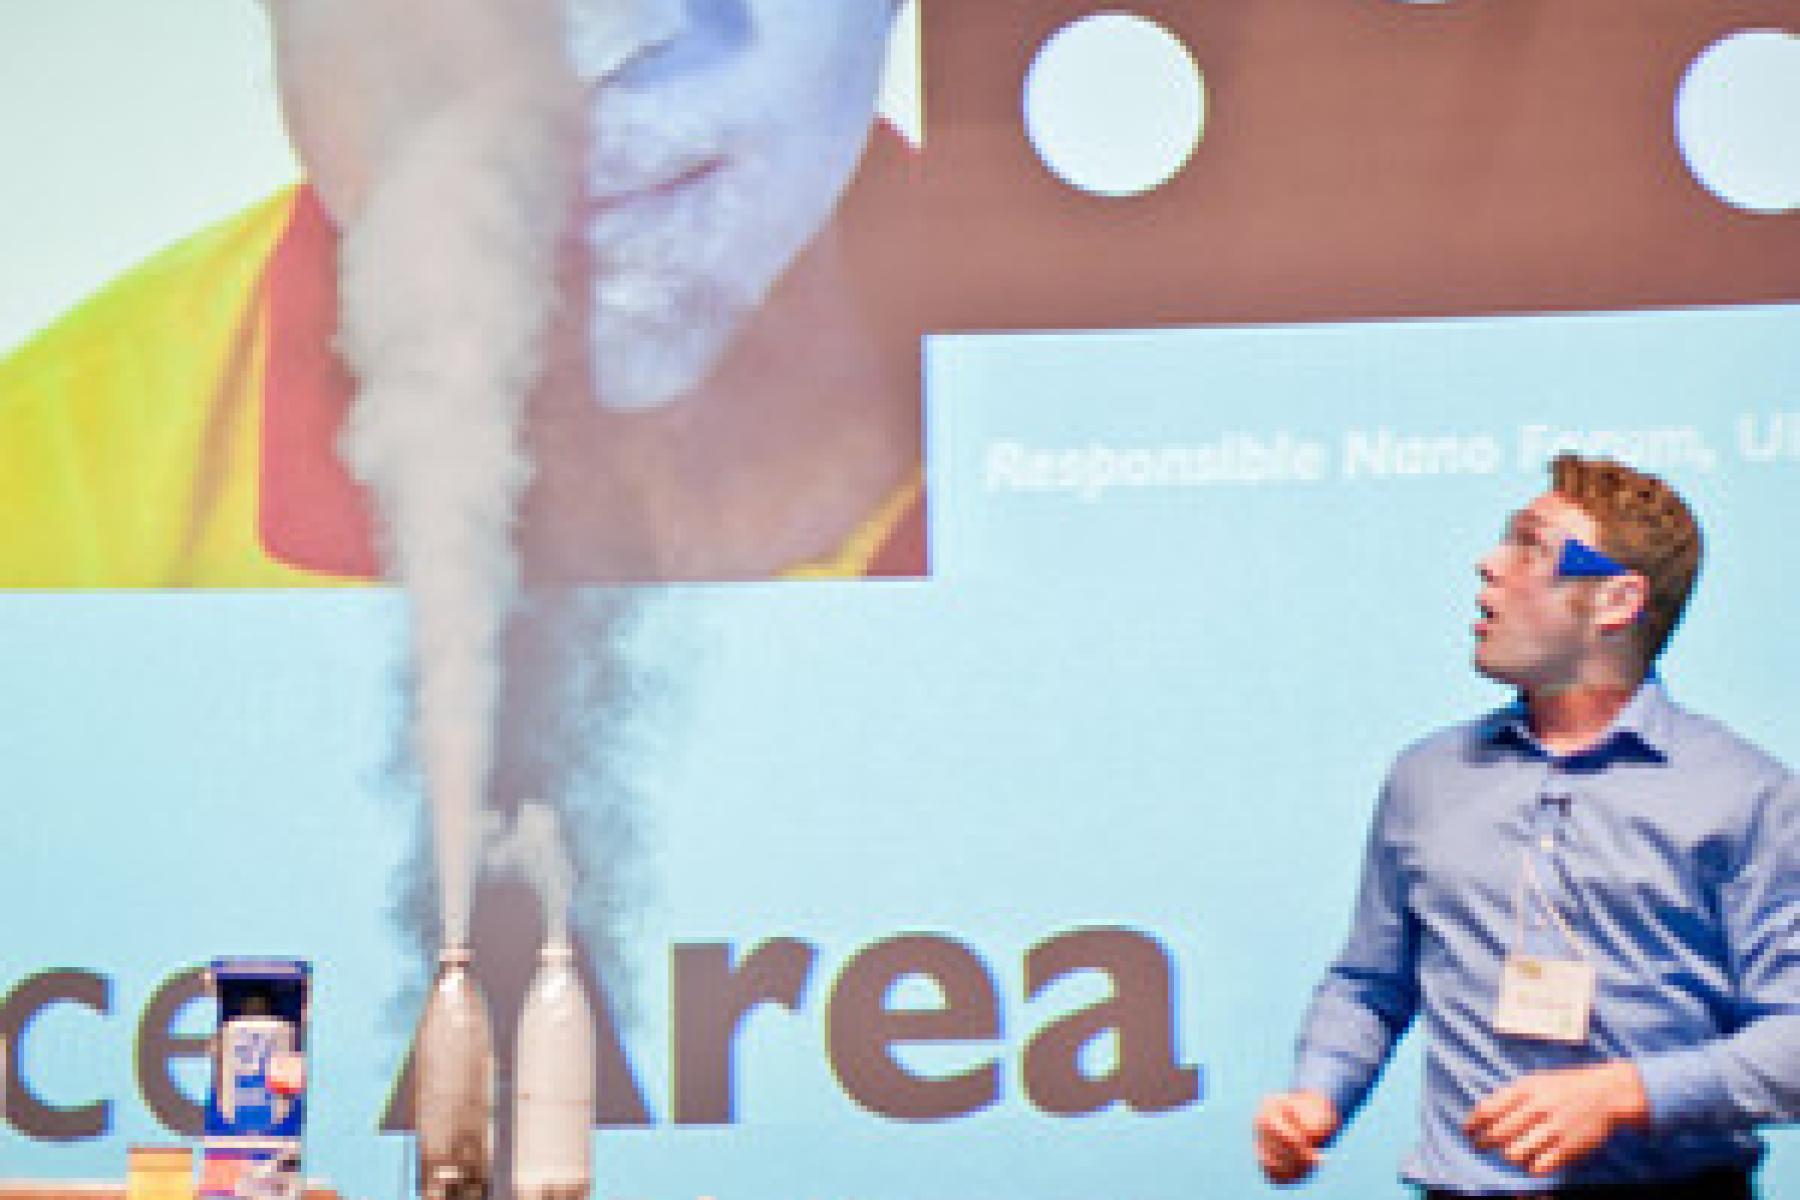 Educator on stage with aerosols coming out of bottle